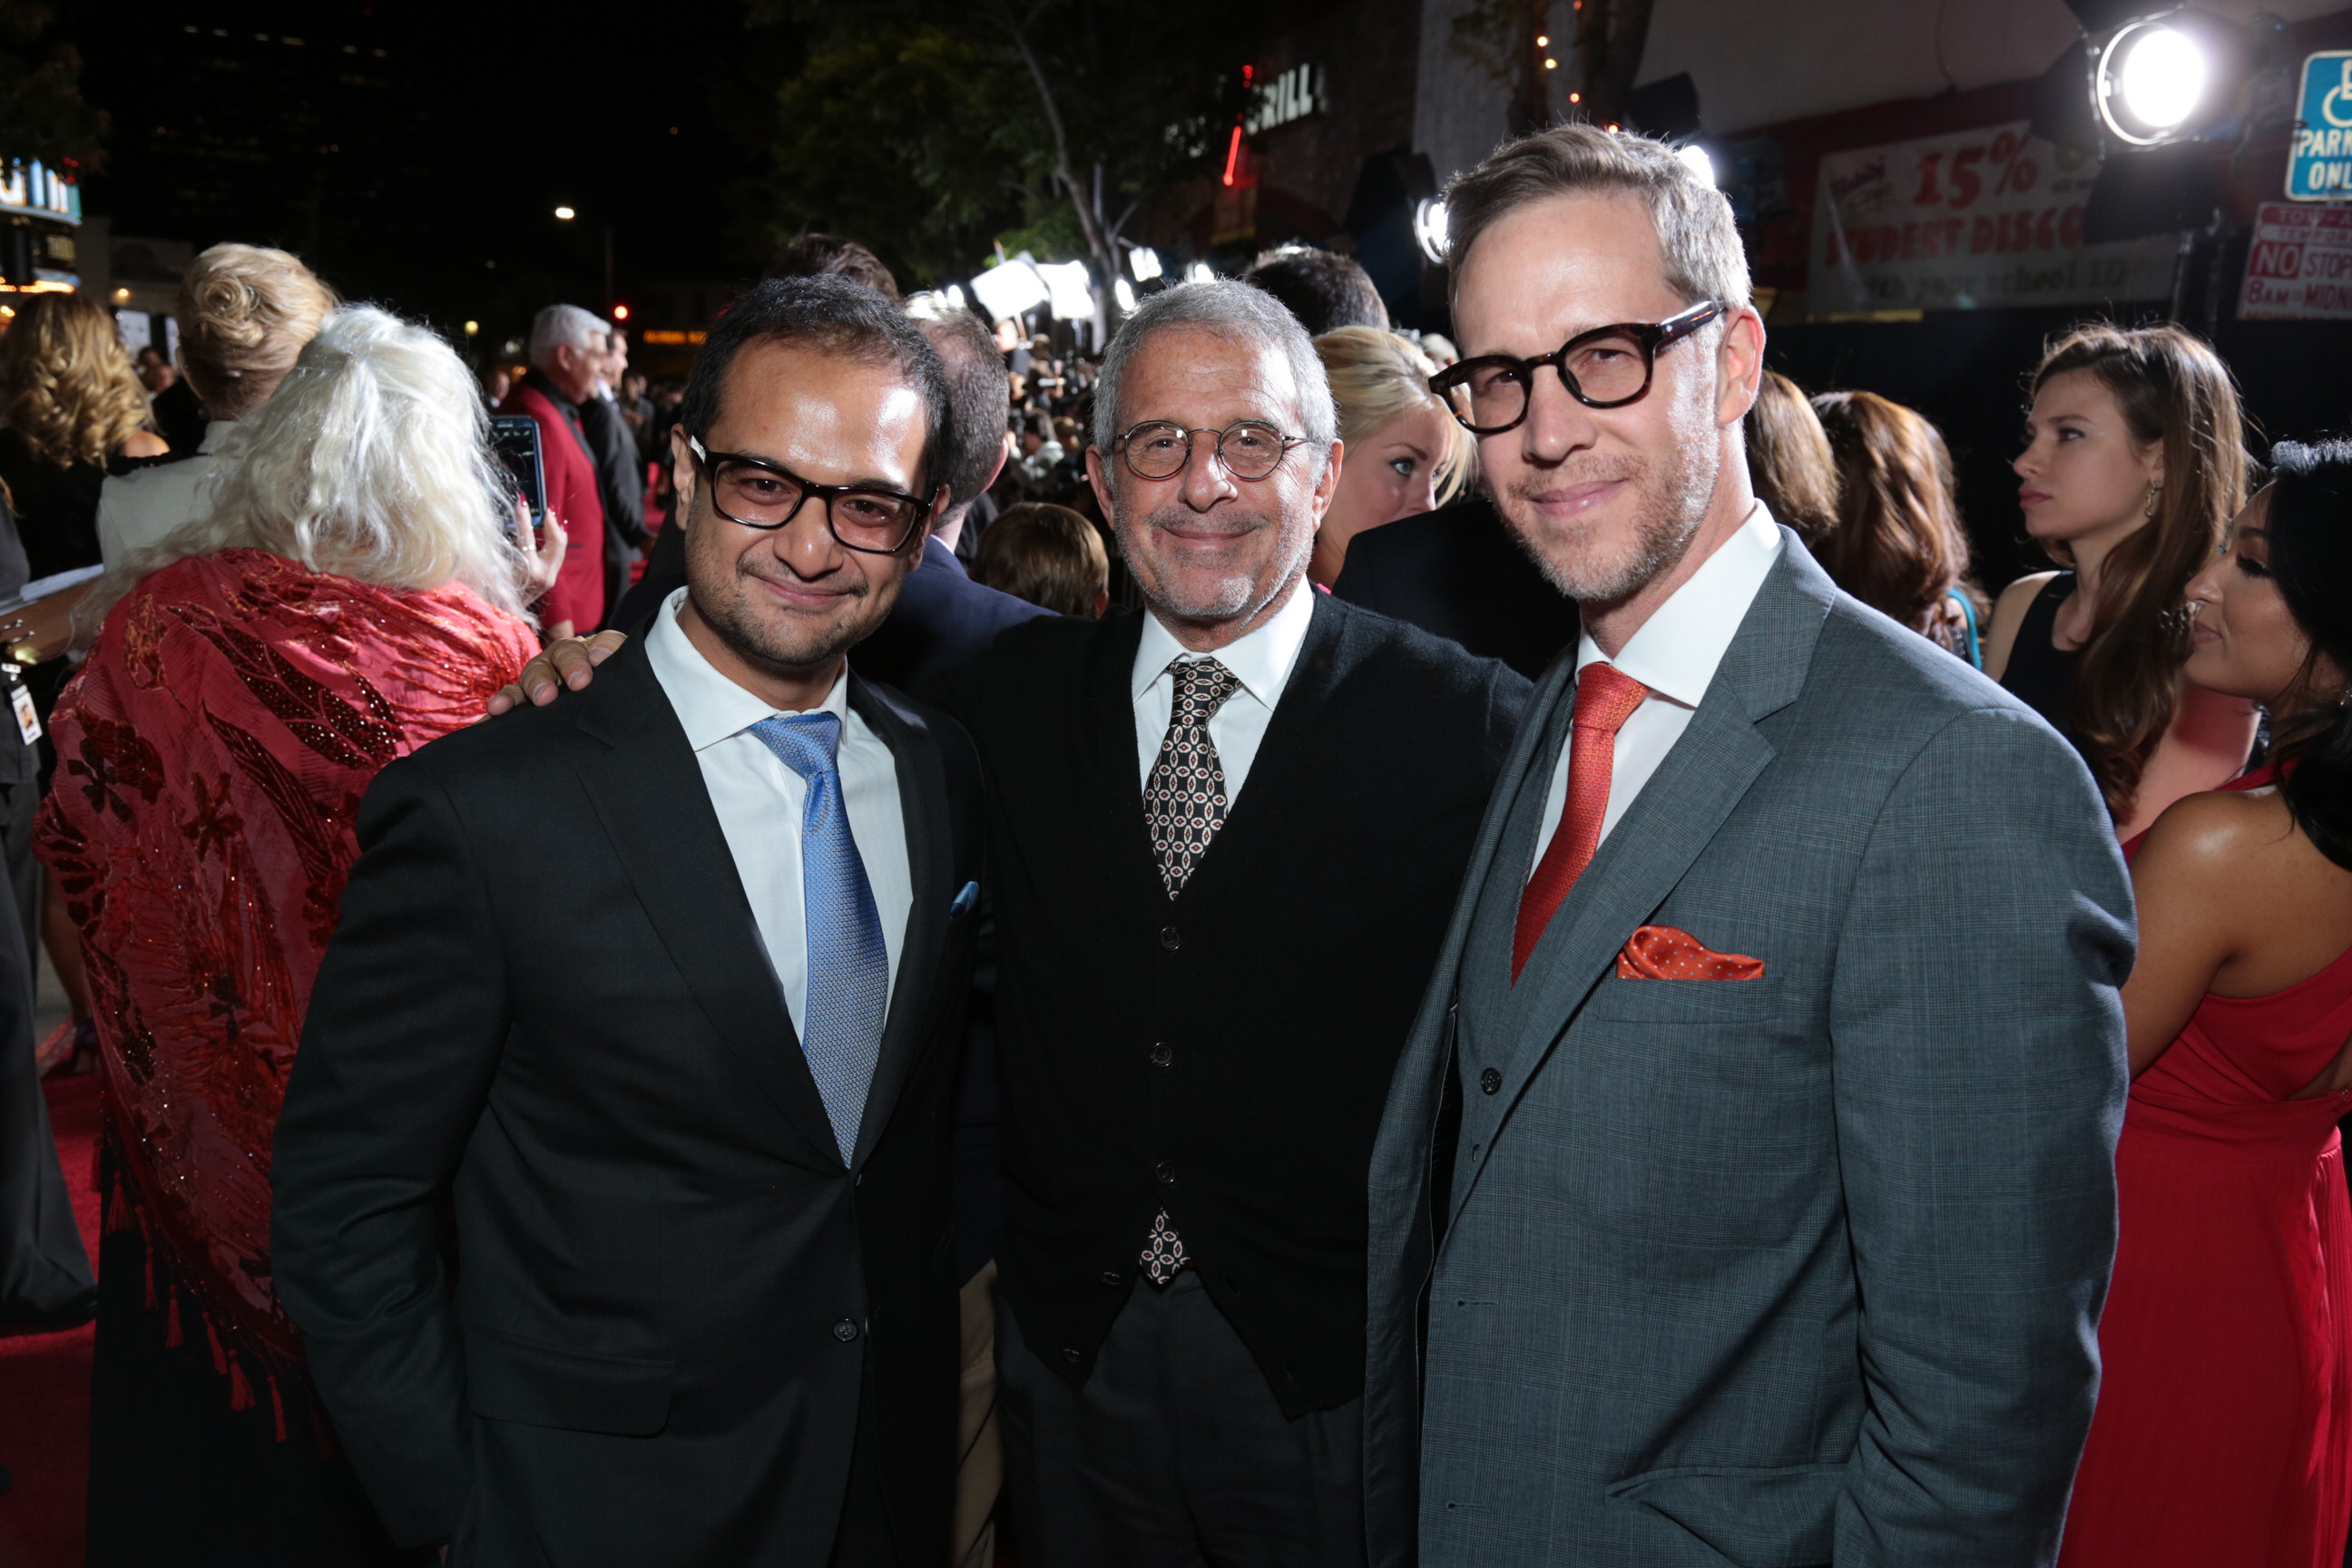 Riza Aziz, Ron Meyer and Joey McFarland at the Dumb and Dumber To Premiere in Los Angeles.